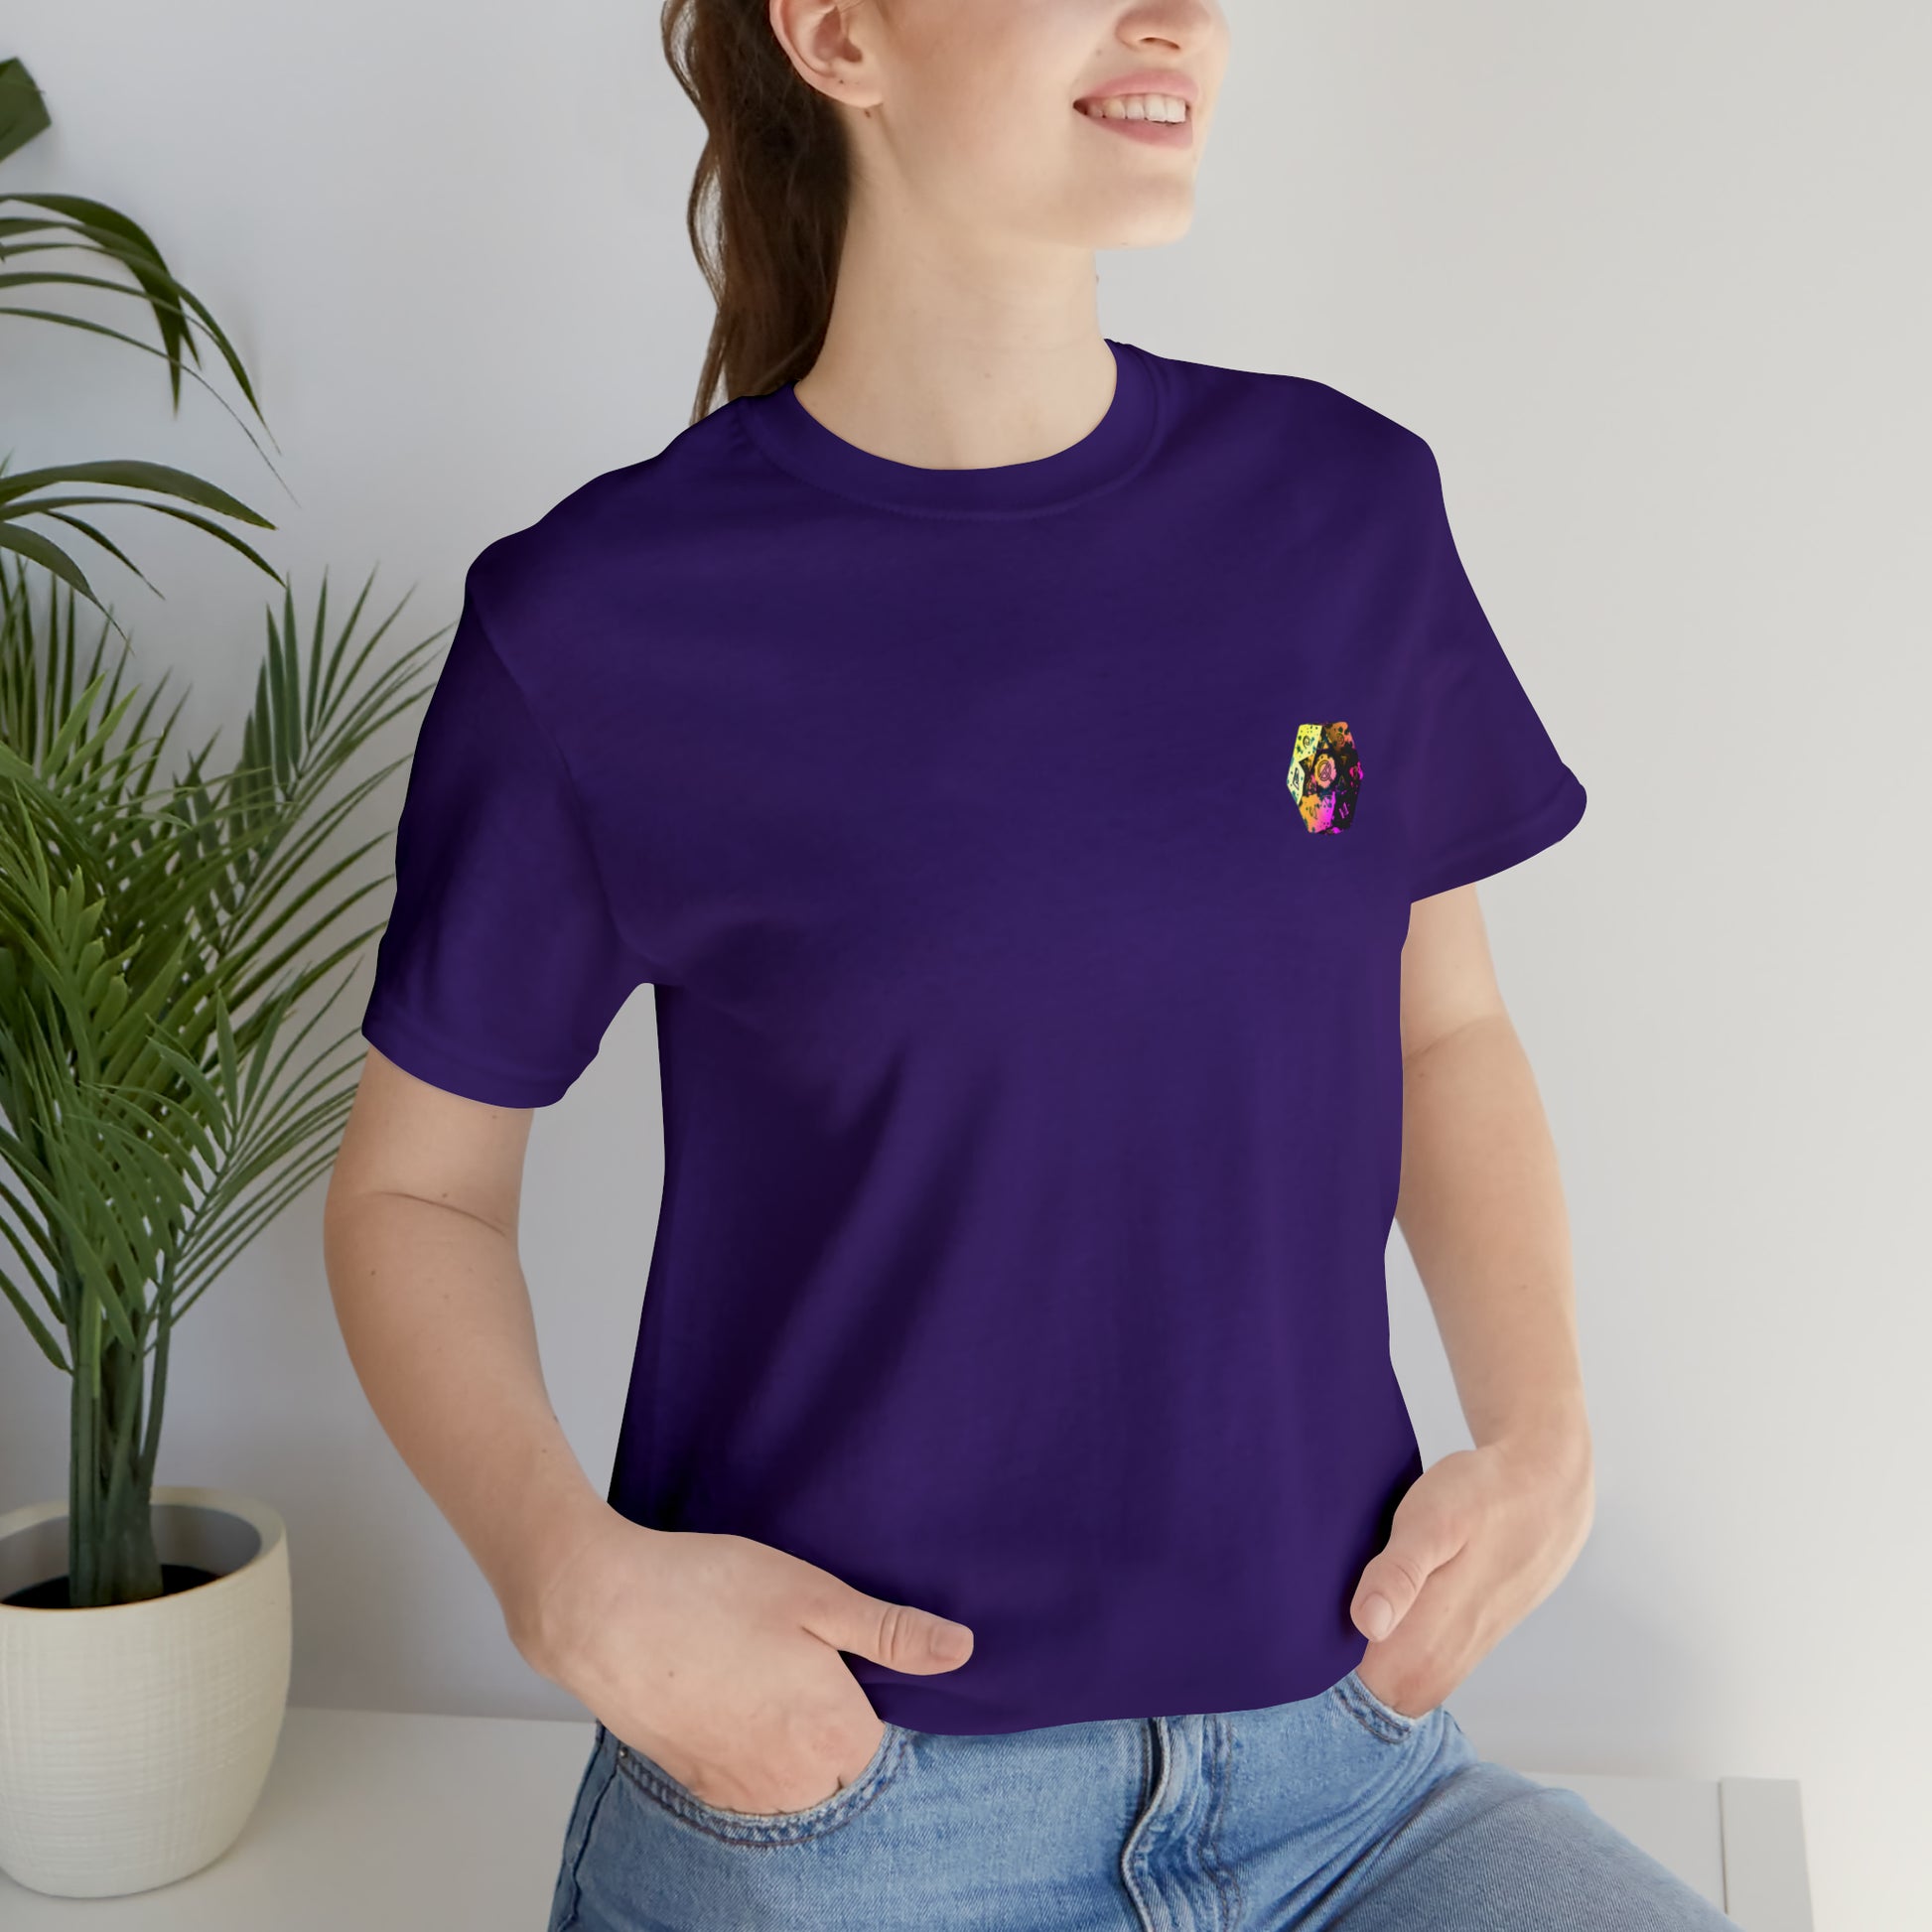 team-purple-quest-thread-tee-shirt-with-small-neon-splatter-d20-dice-on-left-chest